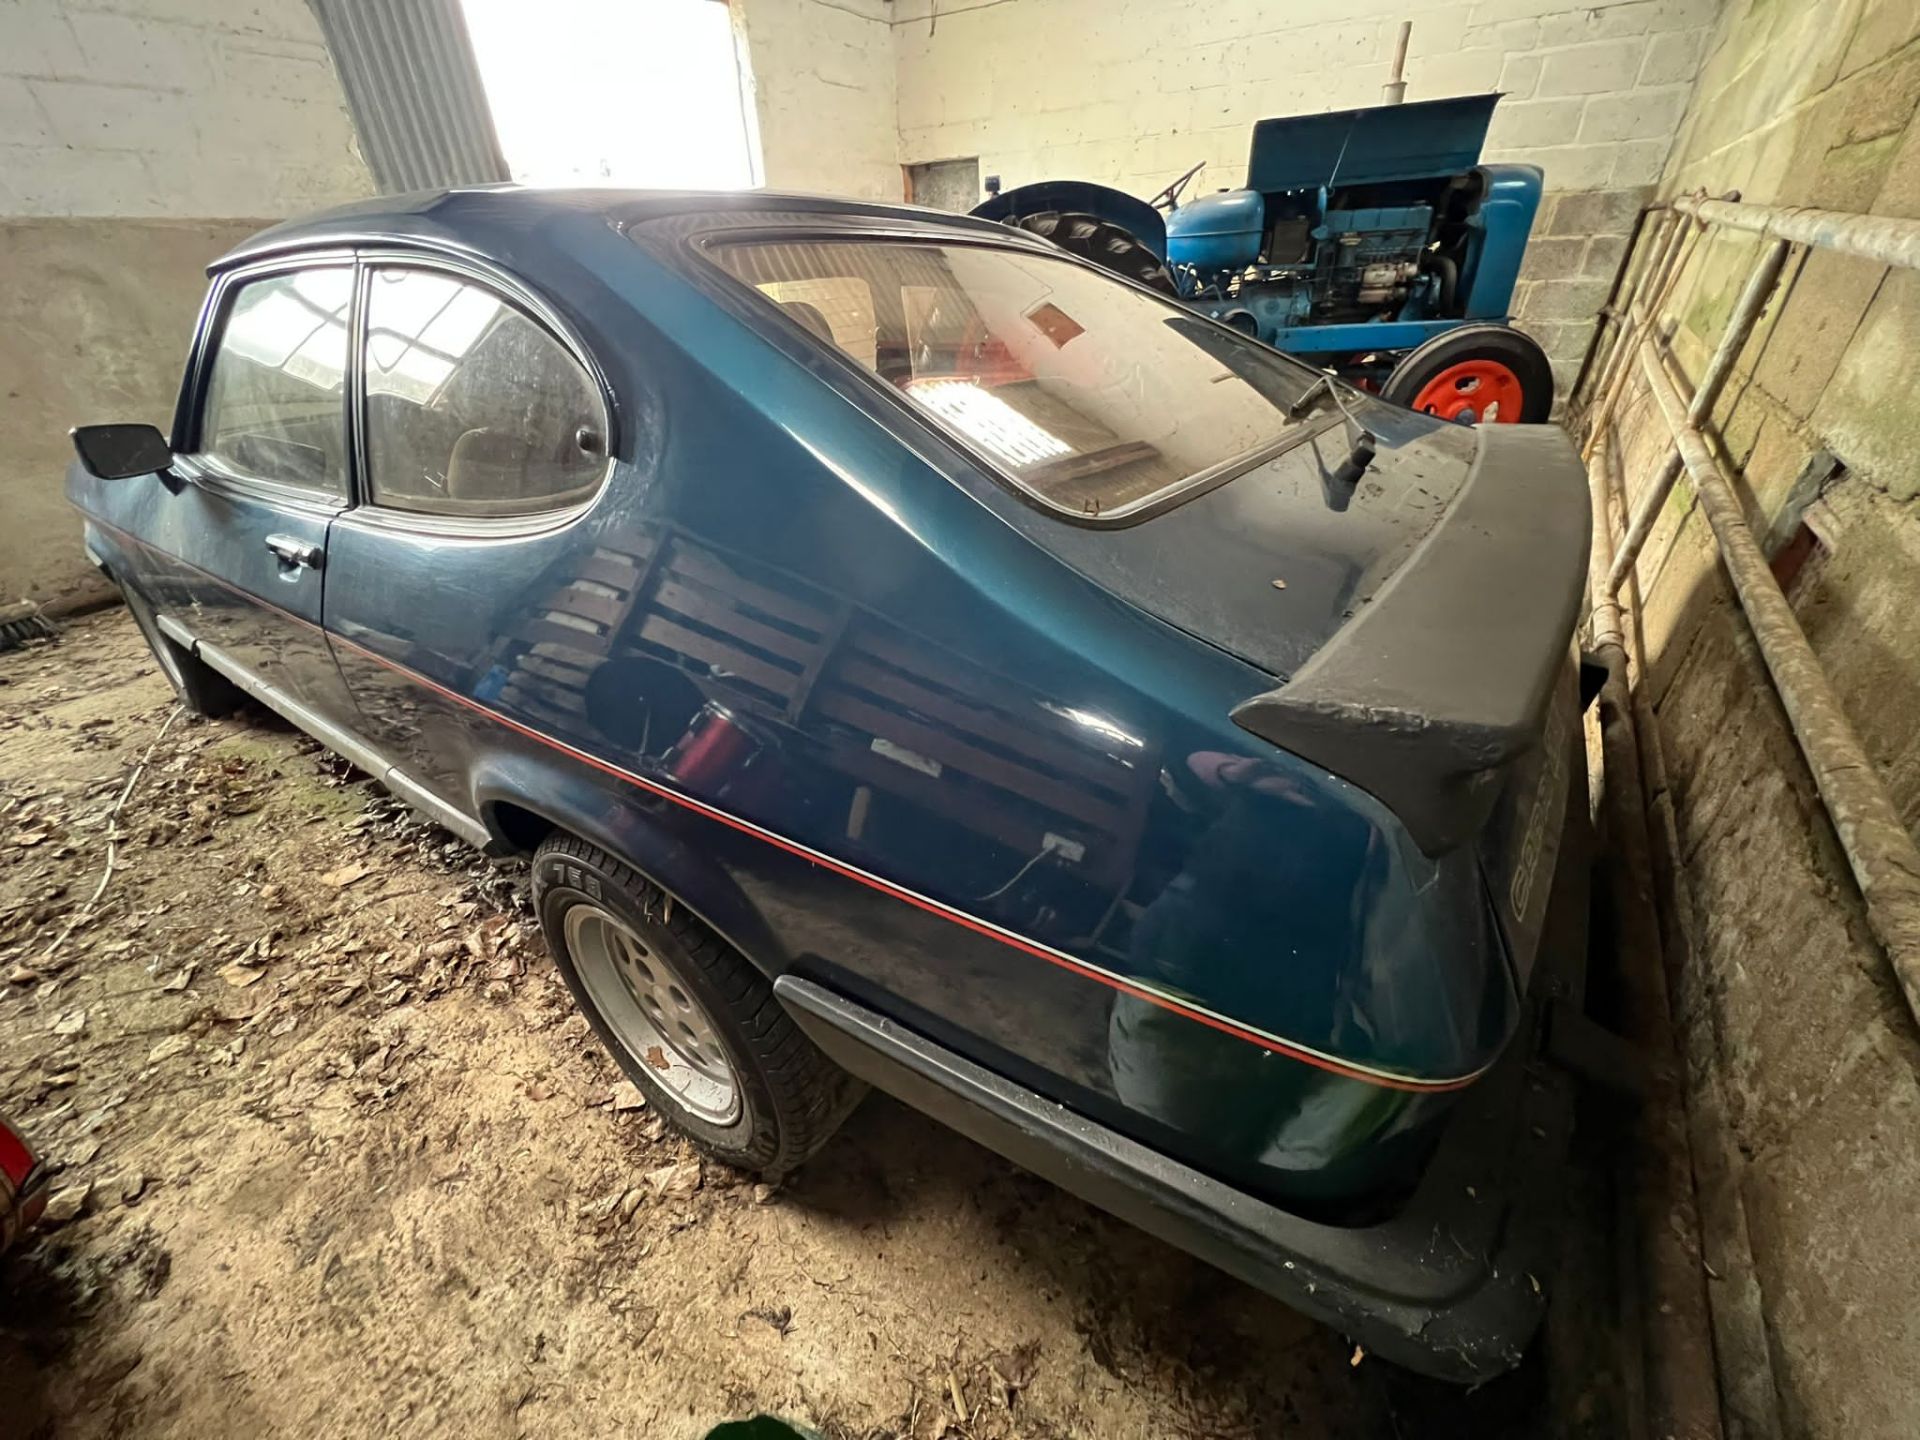 Ford Capri MkIII 2.8 Injection 1981 - Barn Find - Image 17 of 44